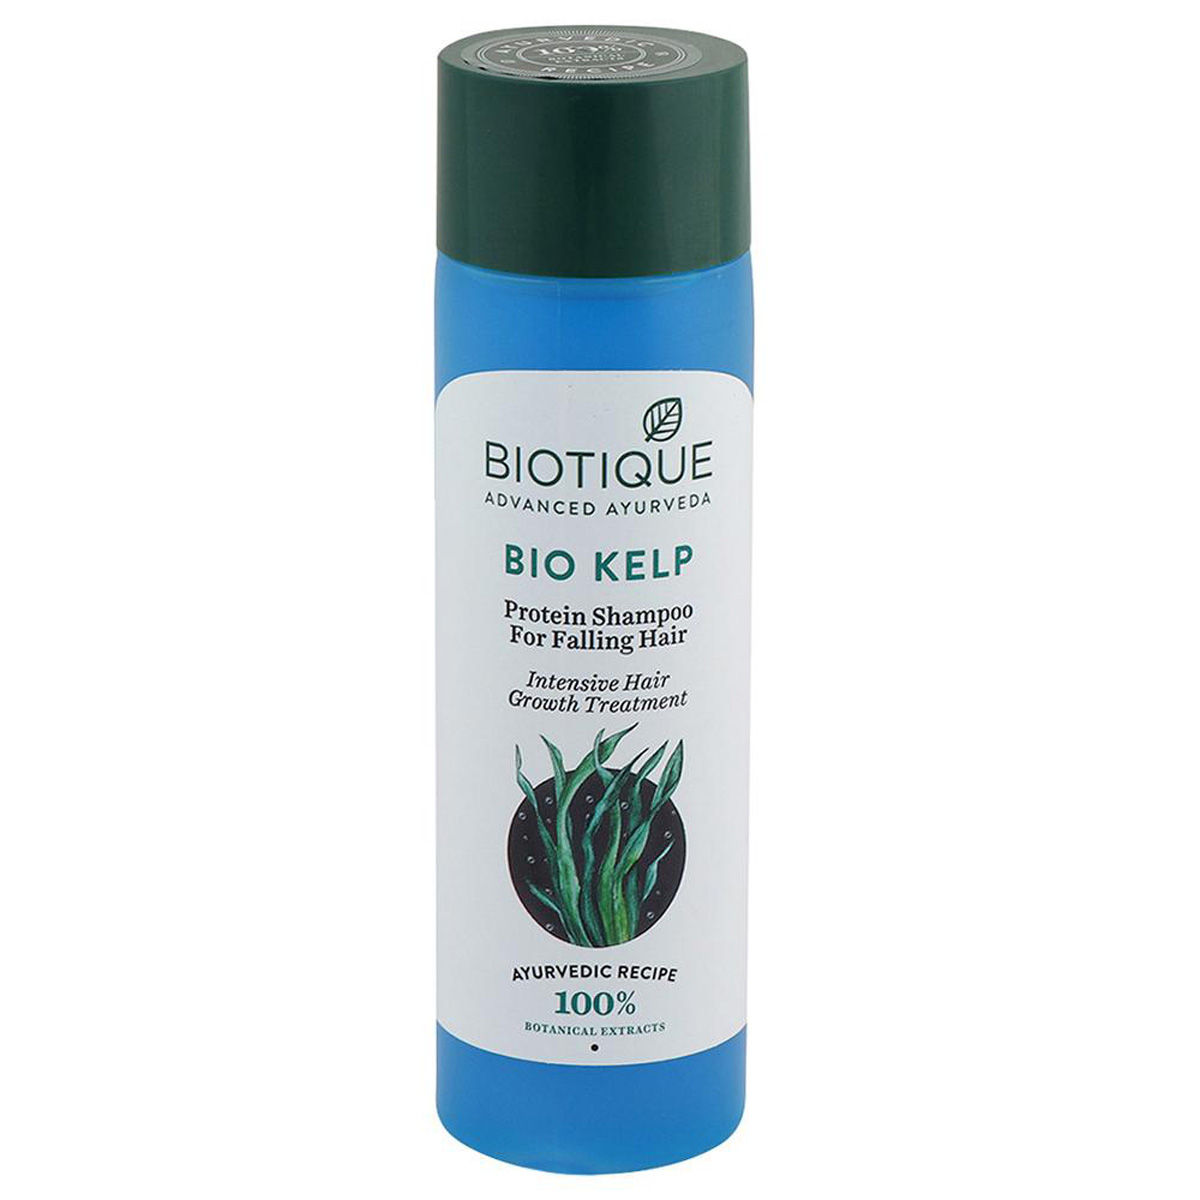 Biotique Bio Kelp Protein Shampoo for Falling Hair, 190 ml Price, Uses,  Side Effects, Composition - Apollo Pharmacy